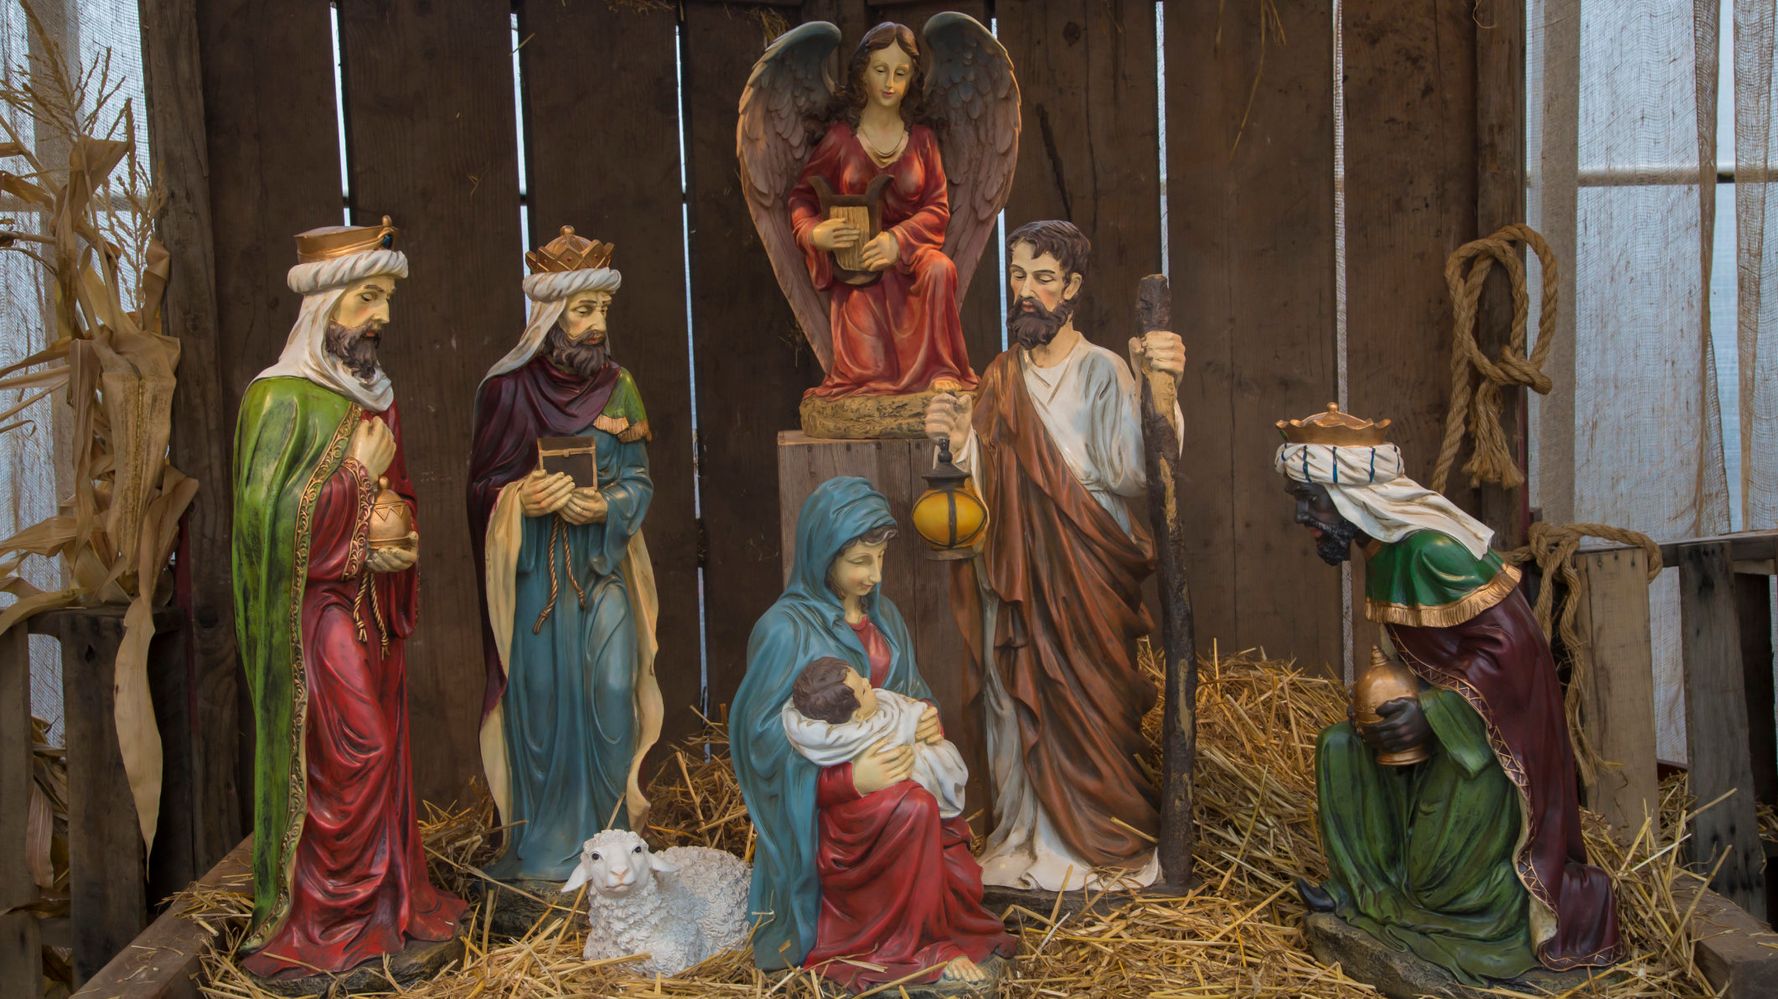 Drunk Driver Found Hiding In Nativity Scene After Crashing Car: Police 